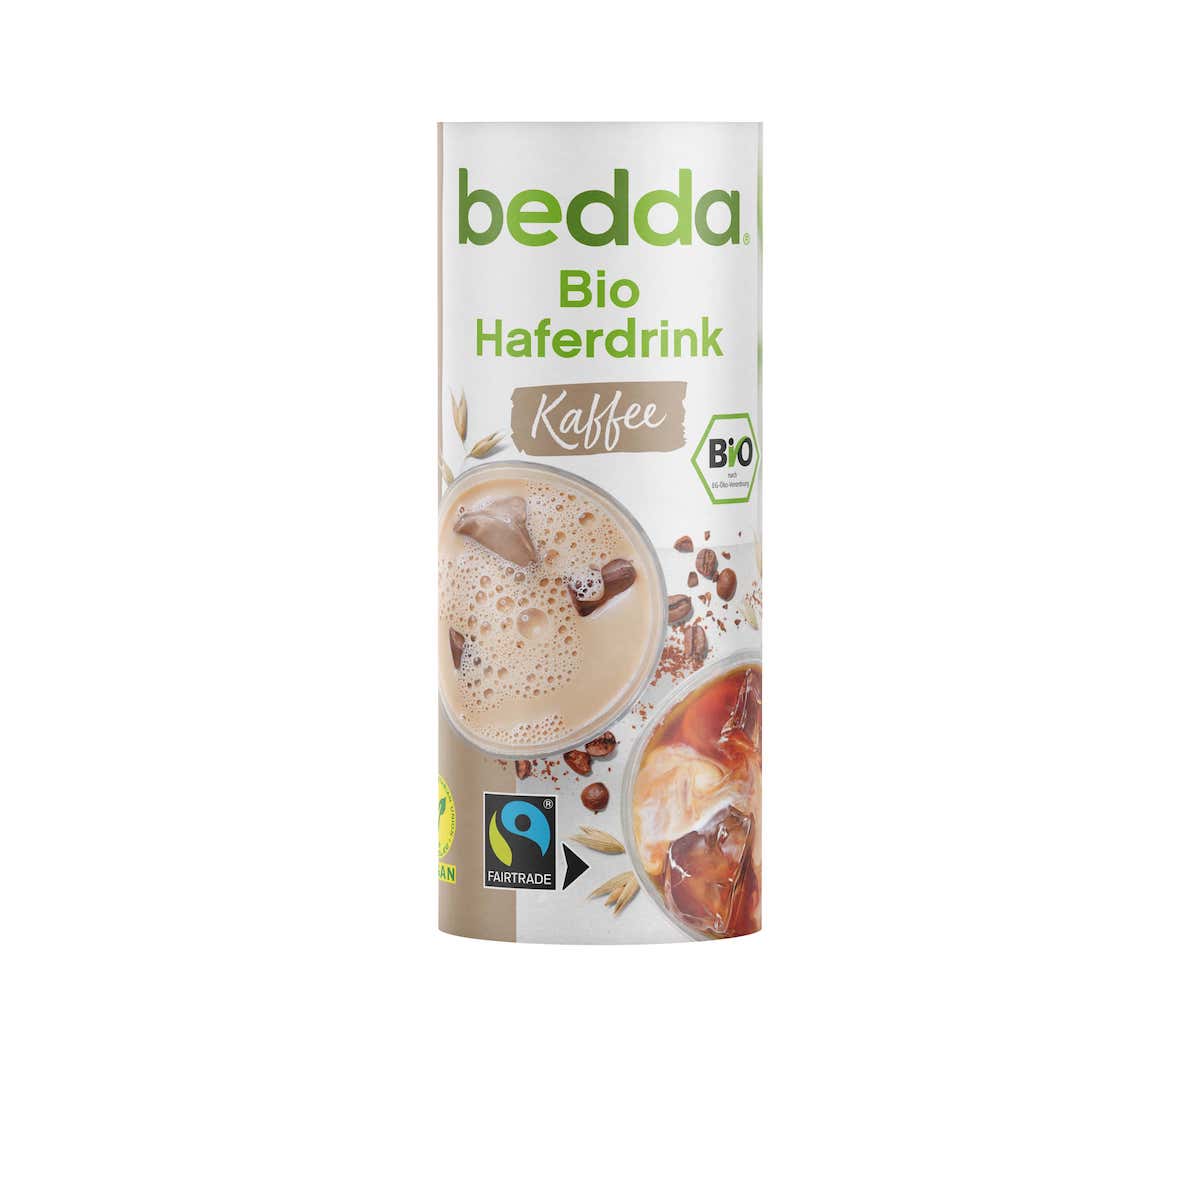 bedda oat drink coffee The herbal pick-me-up for on the go and at home. In a practical 235 ml cup